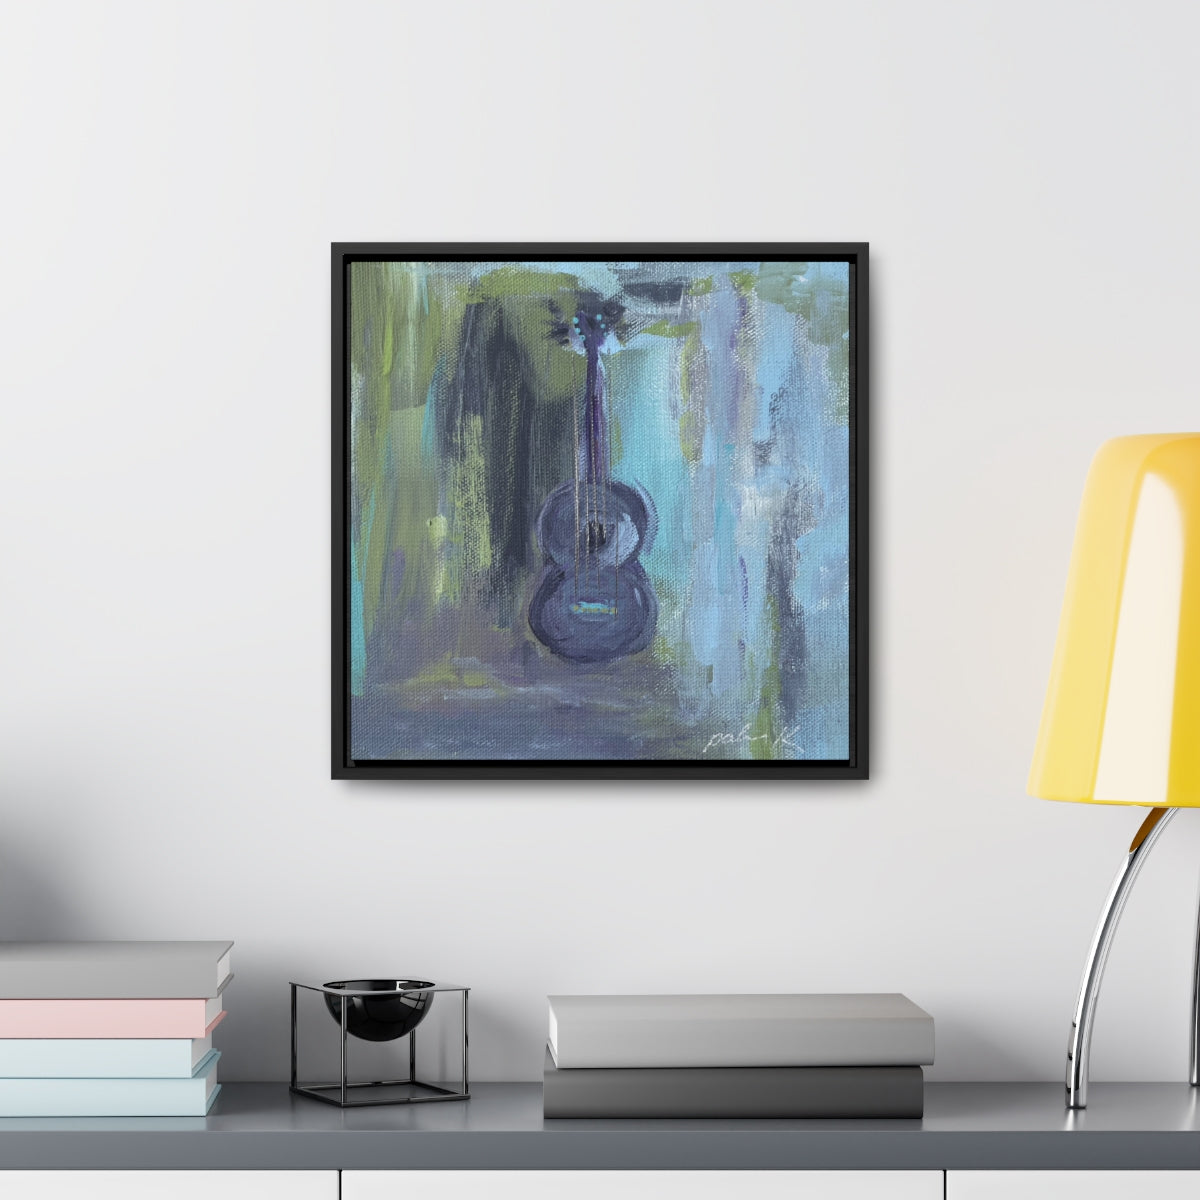 Gallery Canvas Wrap Print in solid wood float frame - "Angel from Montgomery"